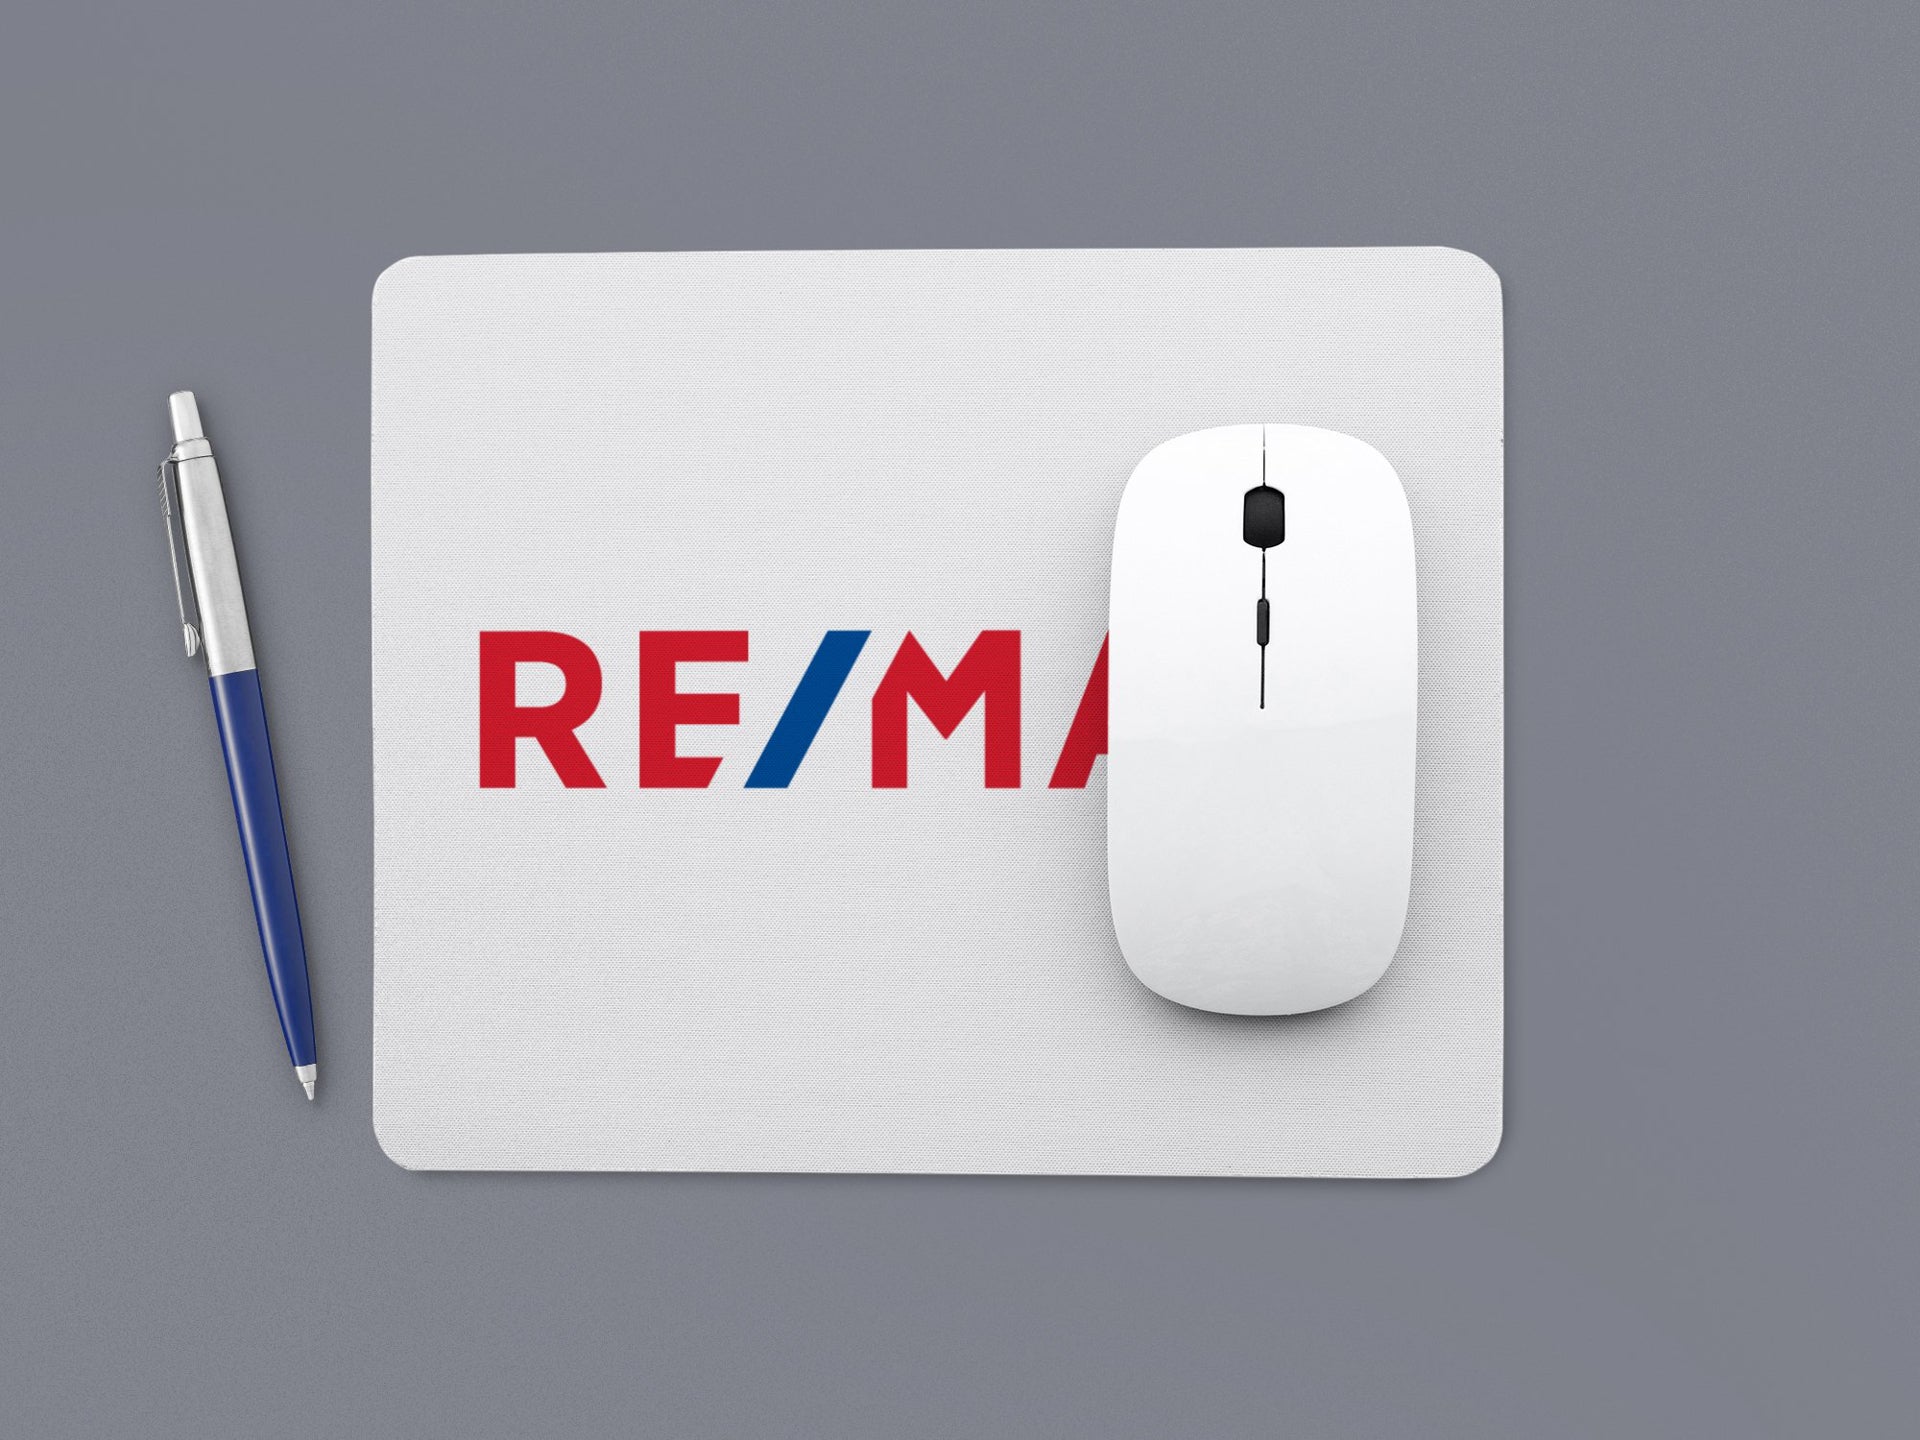 RE/MAX. Mouse Pad - White